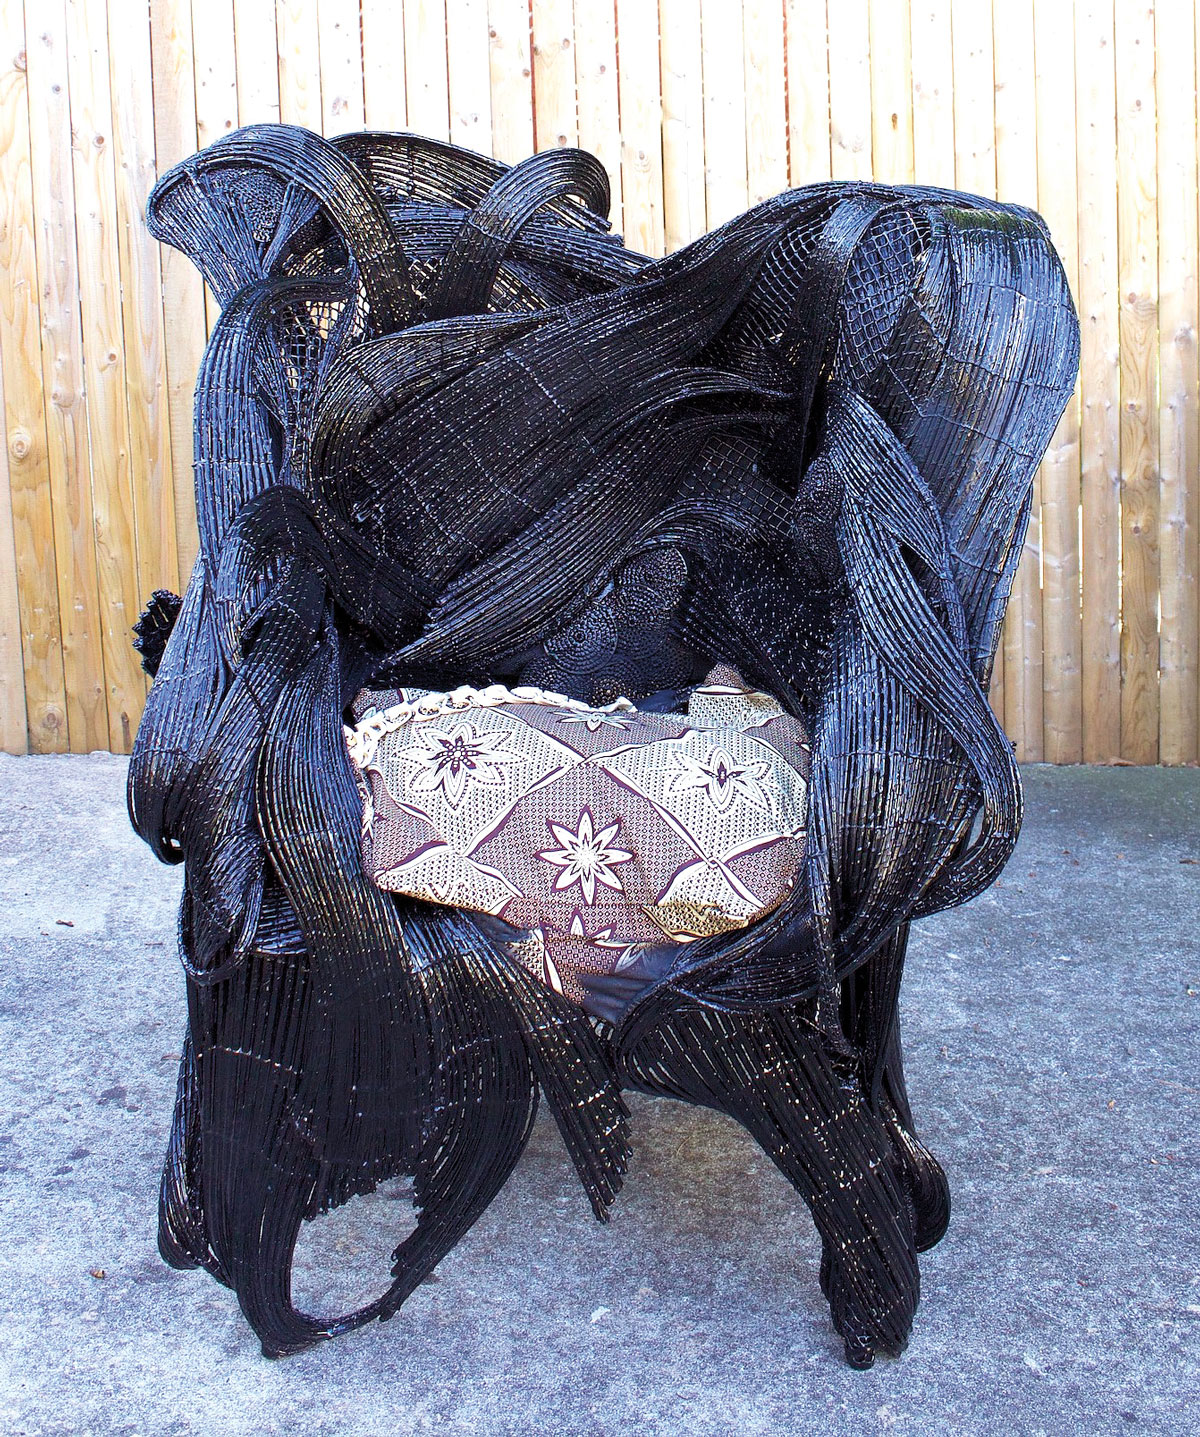 chair made of woven palm spines, metal, wire, hardware cloth, and painted black